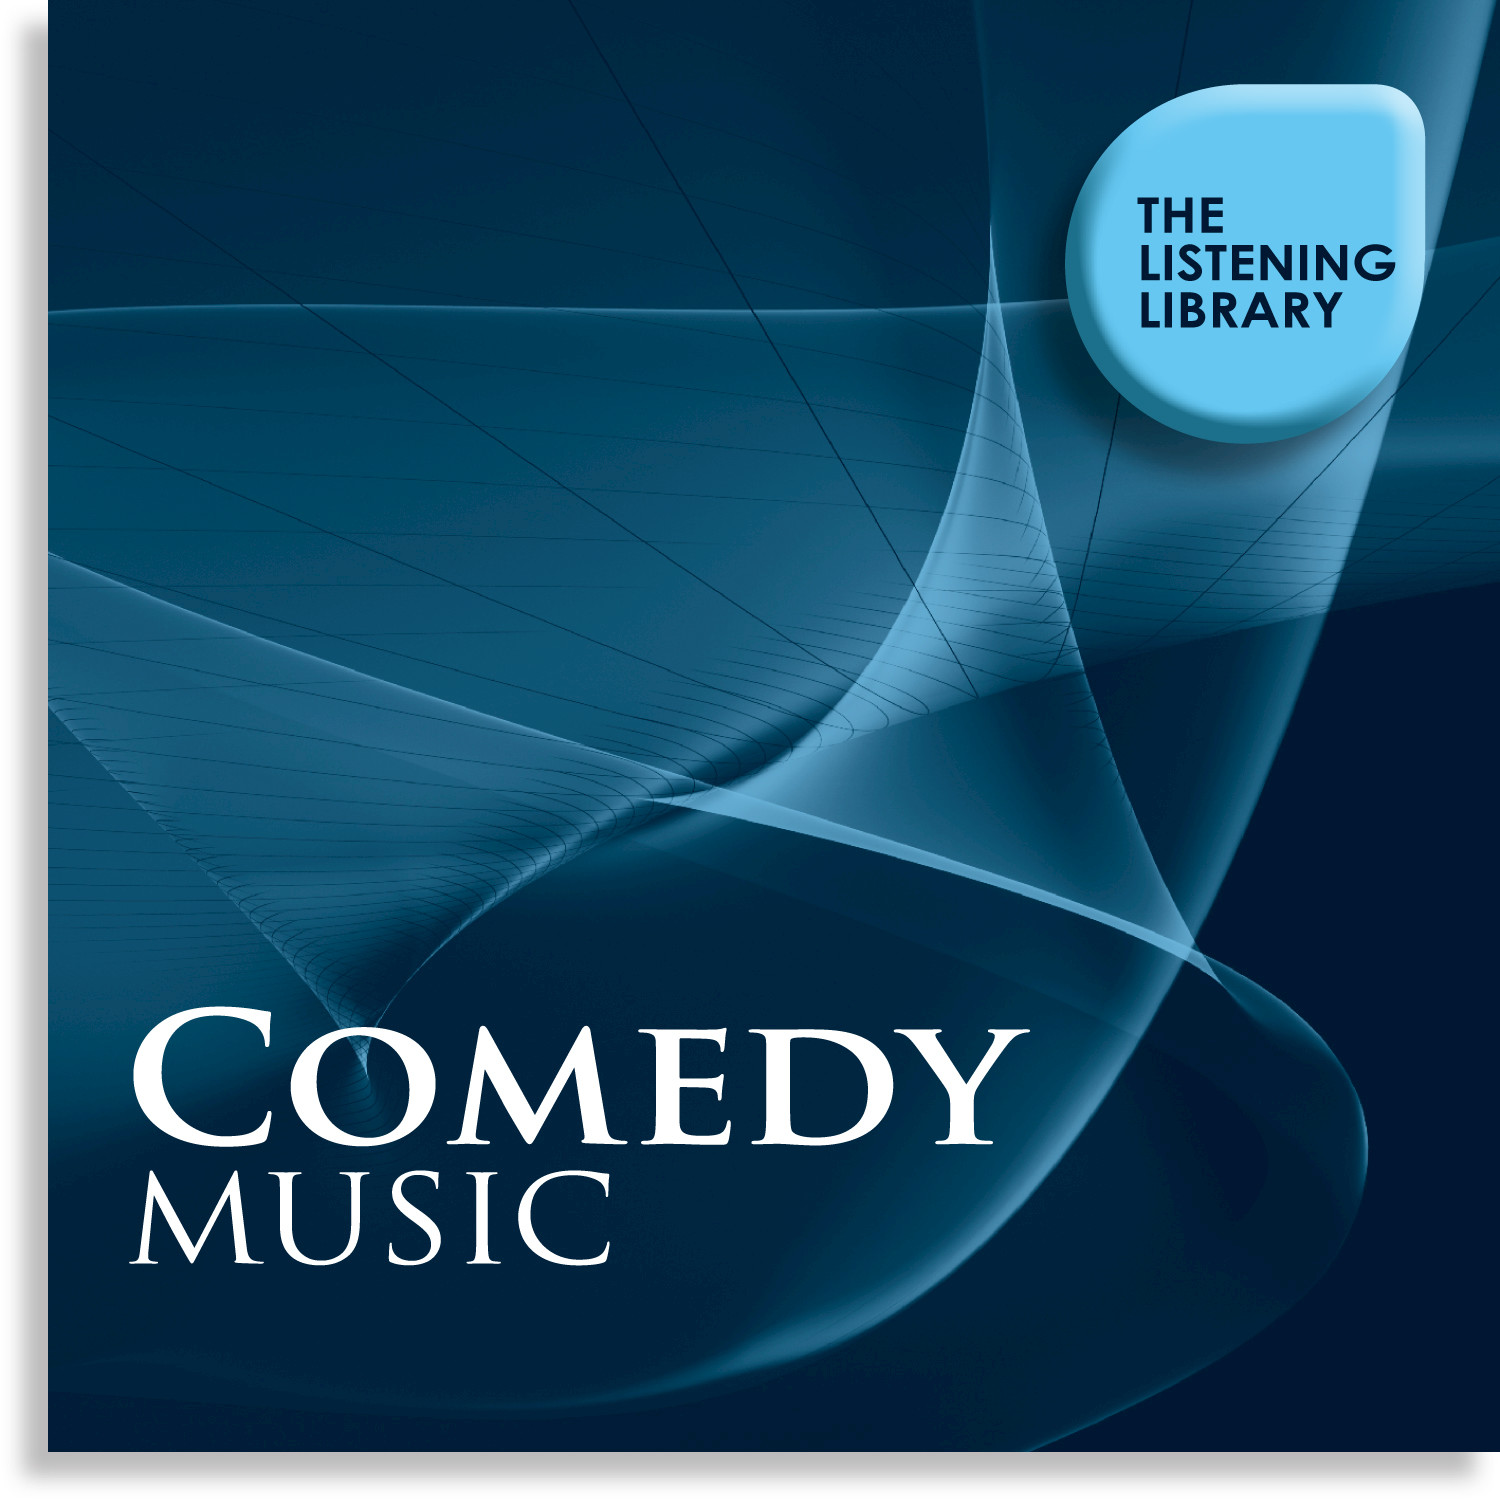 Comedy - The Listening Library